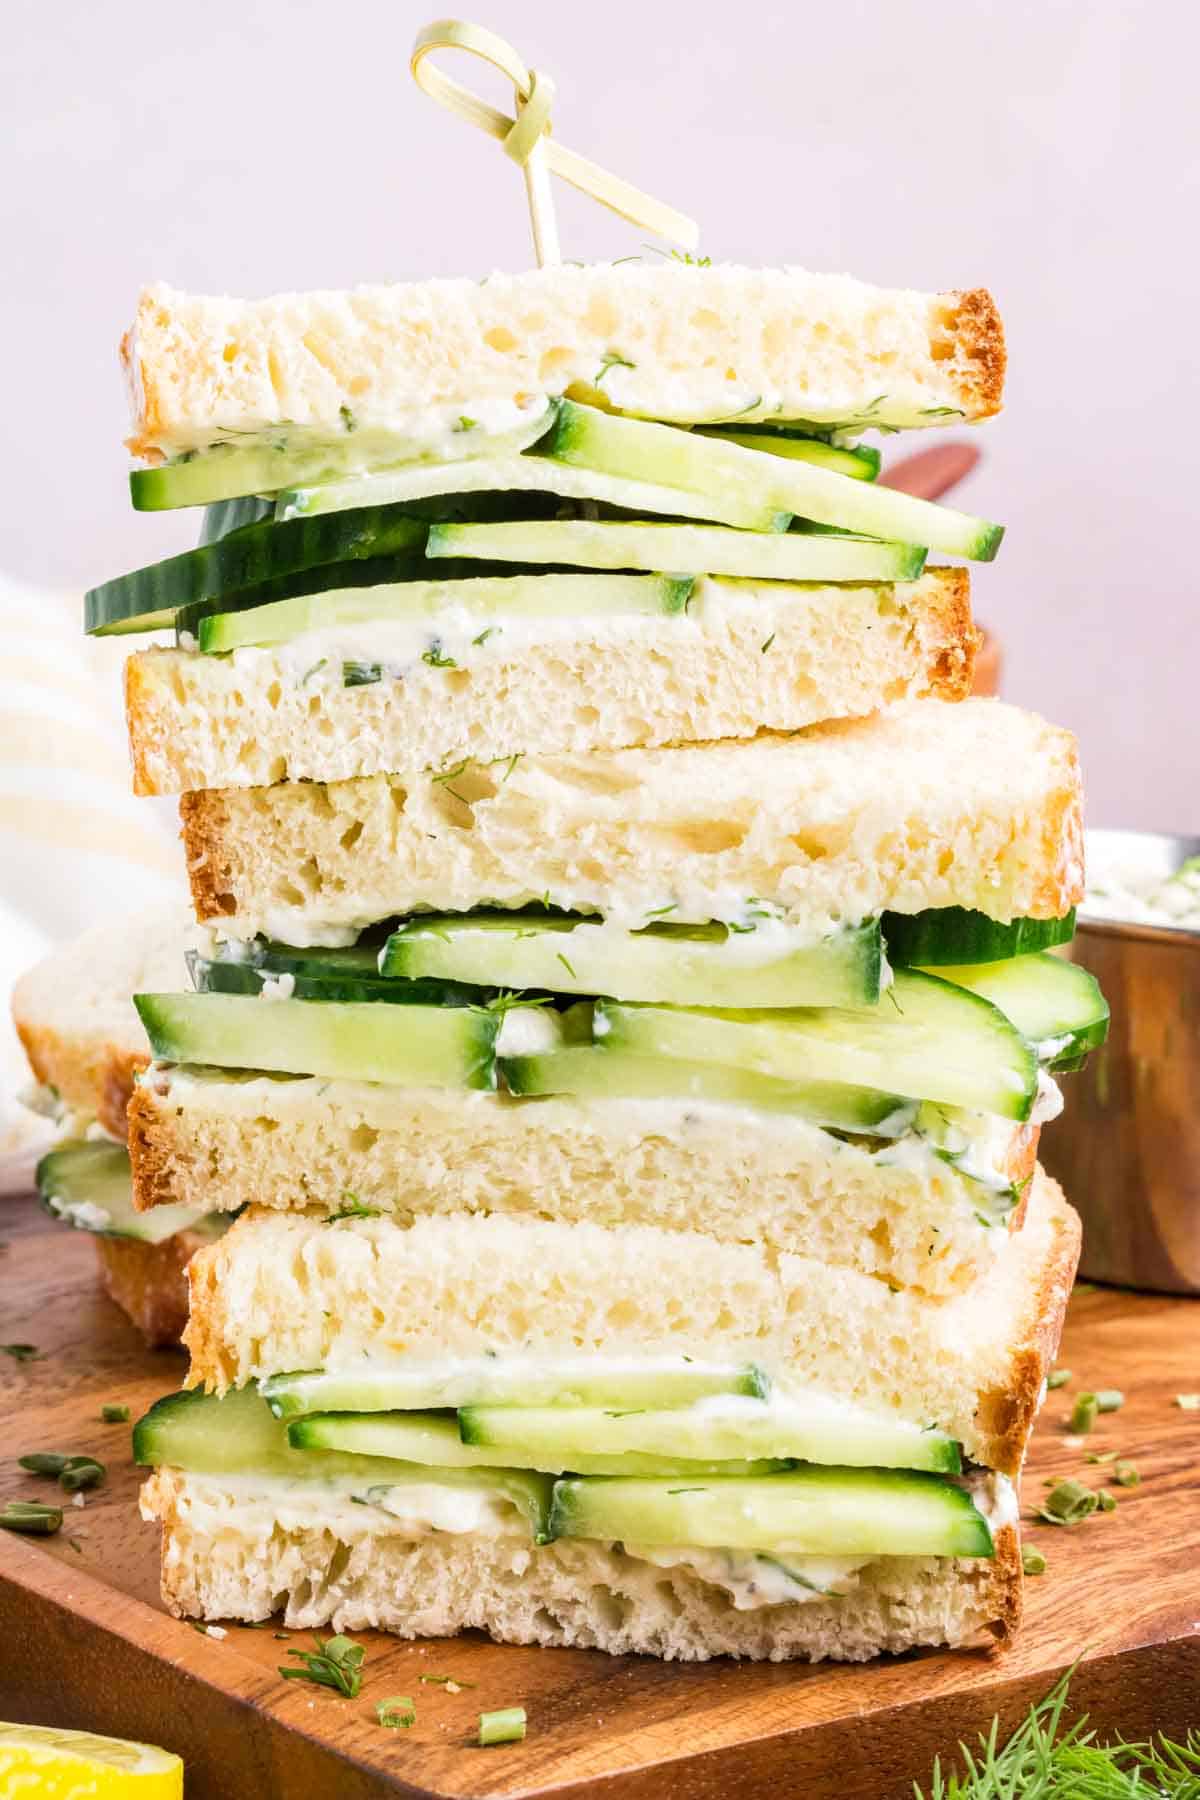 Cucumber sandwiches stacked on top of each other with dill and chives sprinkled for garnish.